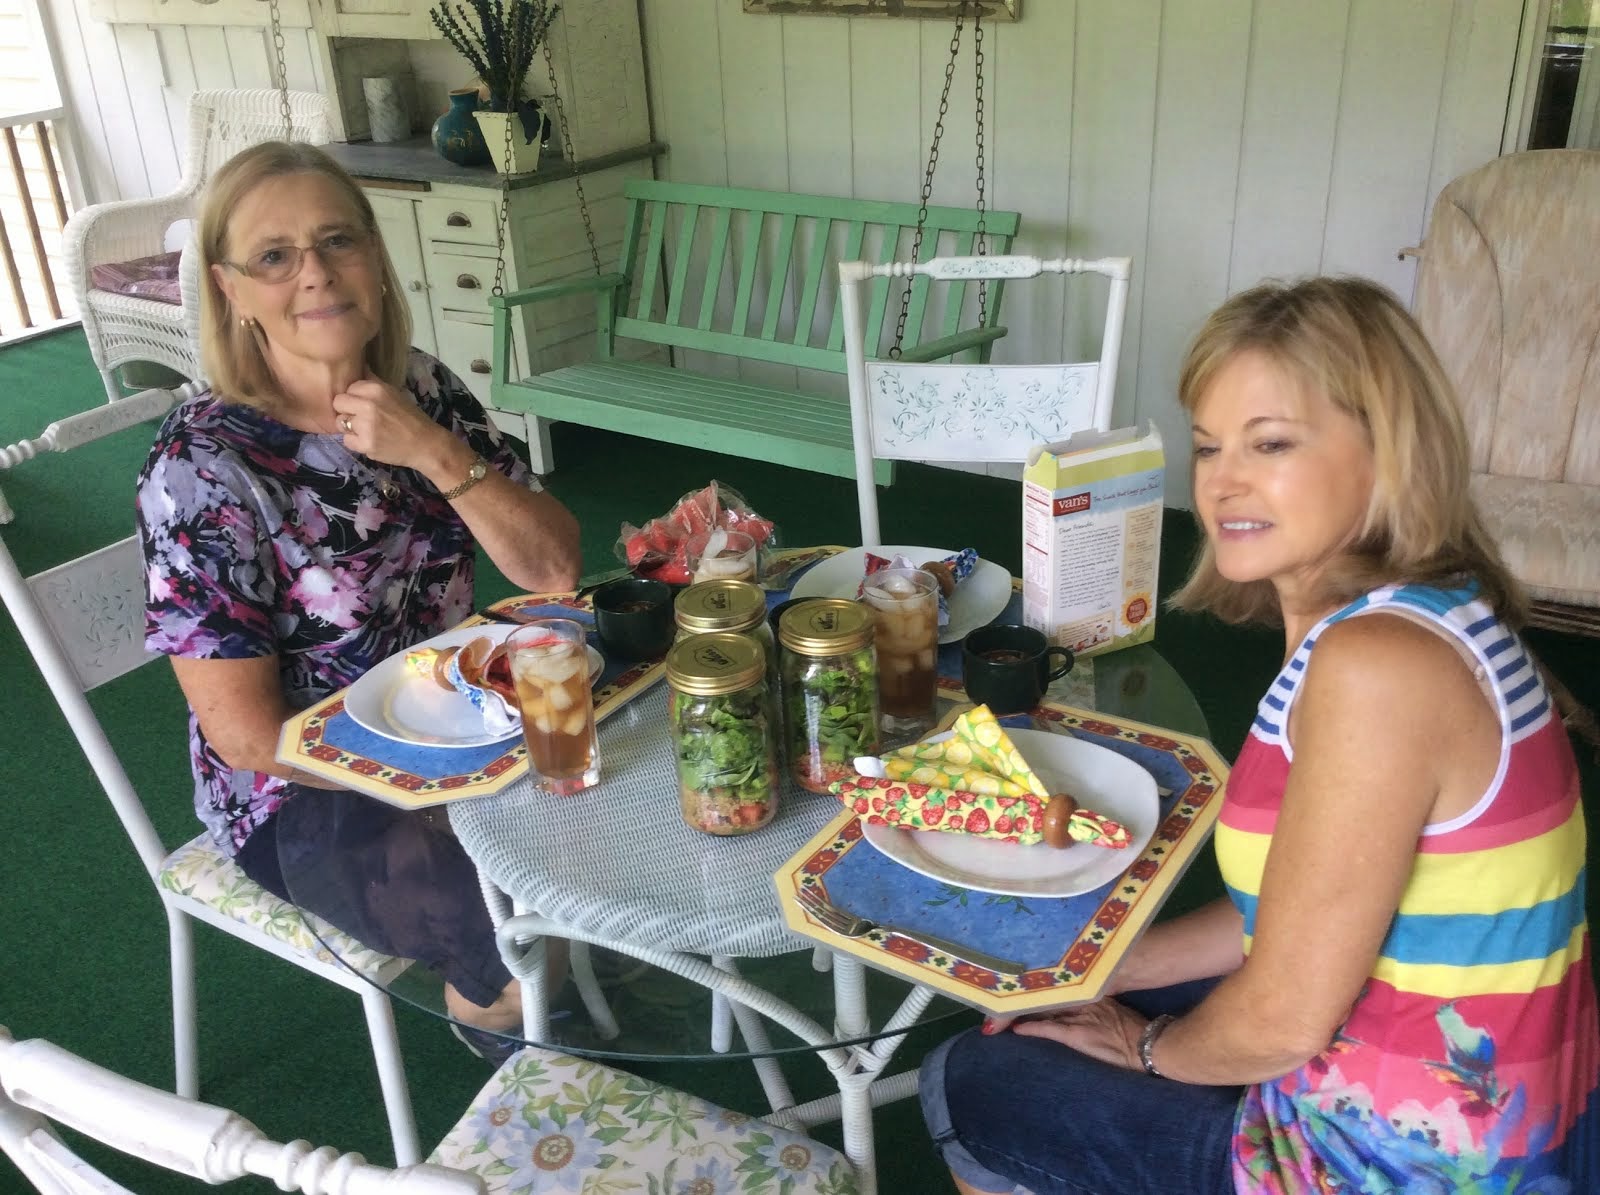 Lunch at Cheryl's with Cindy